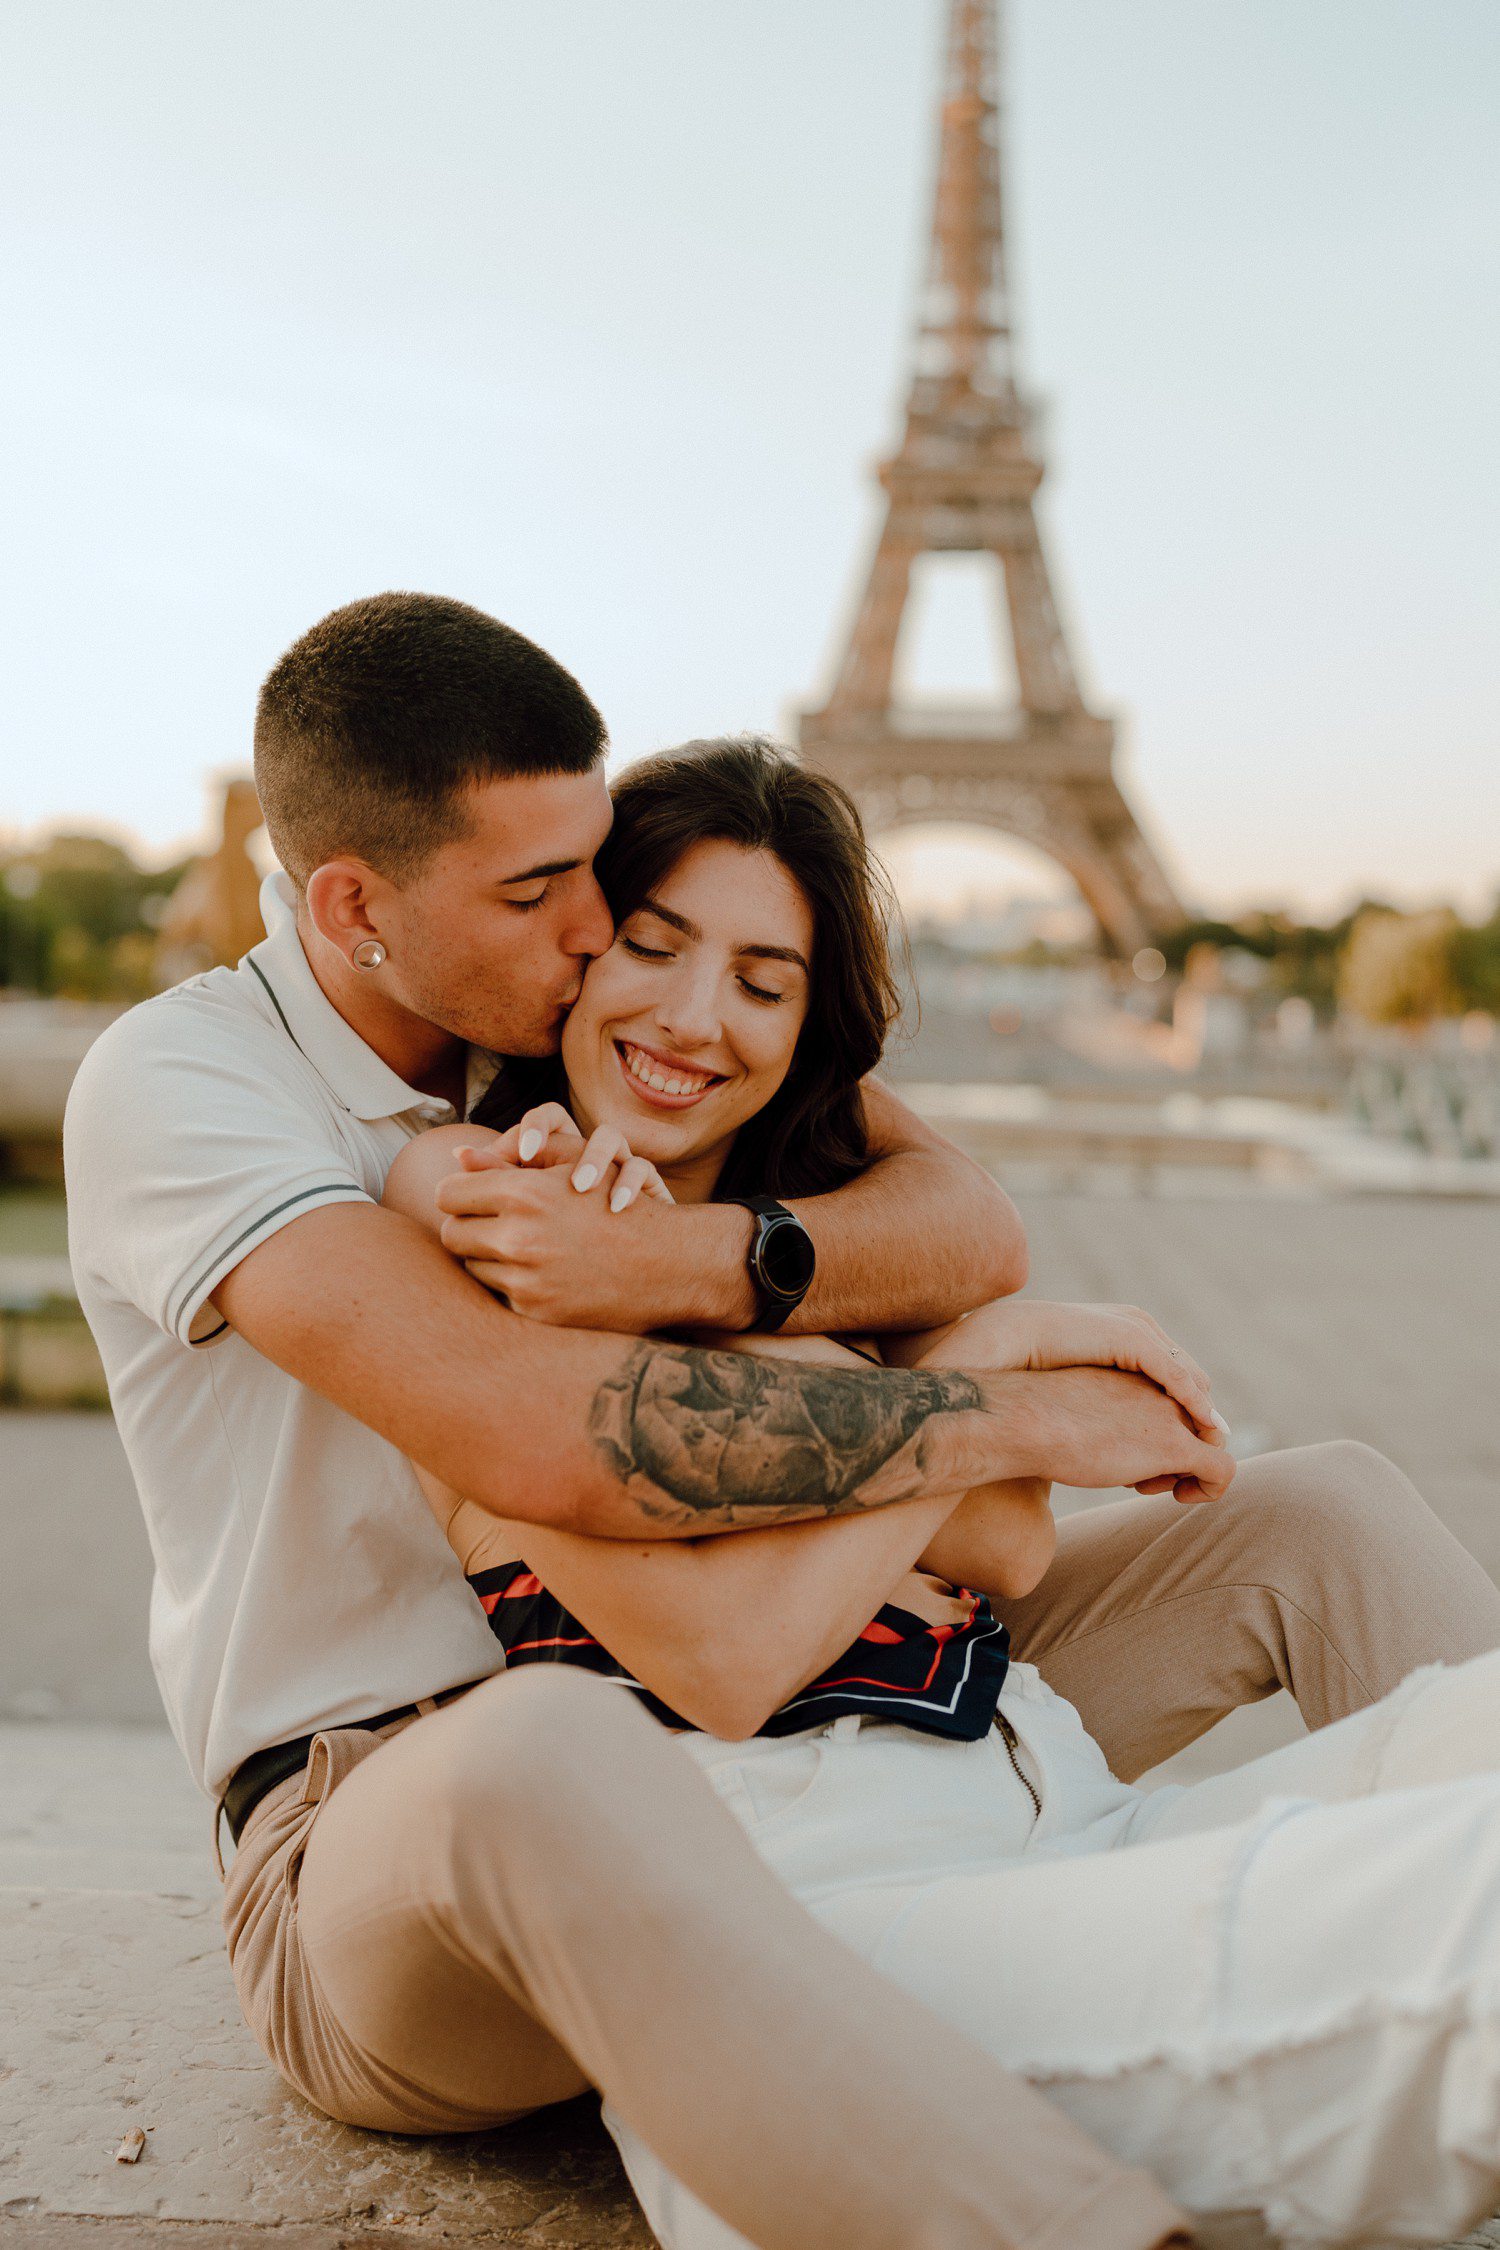 Couples Session in Paris France at the Eiffel Tower